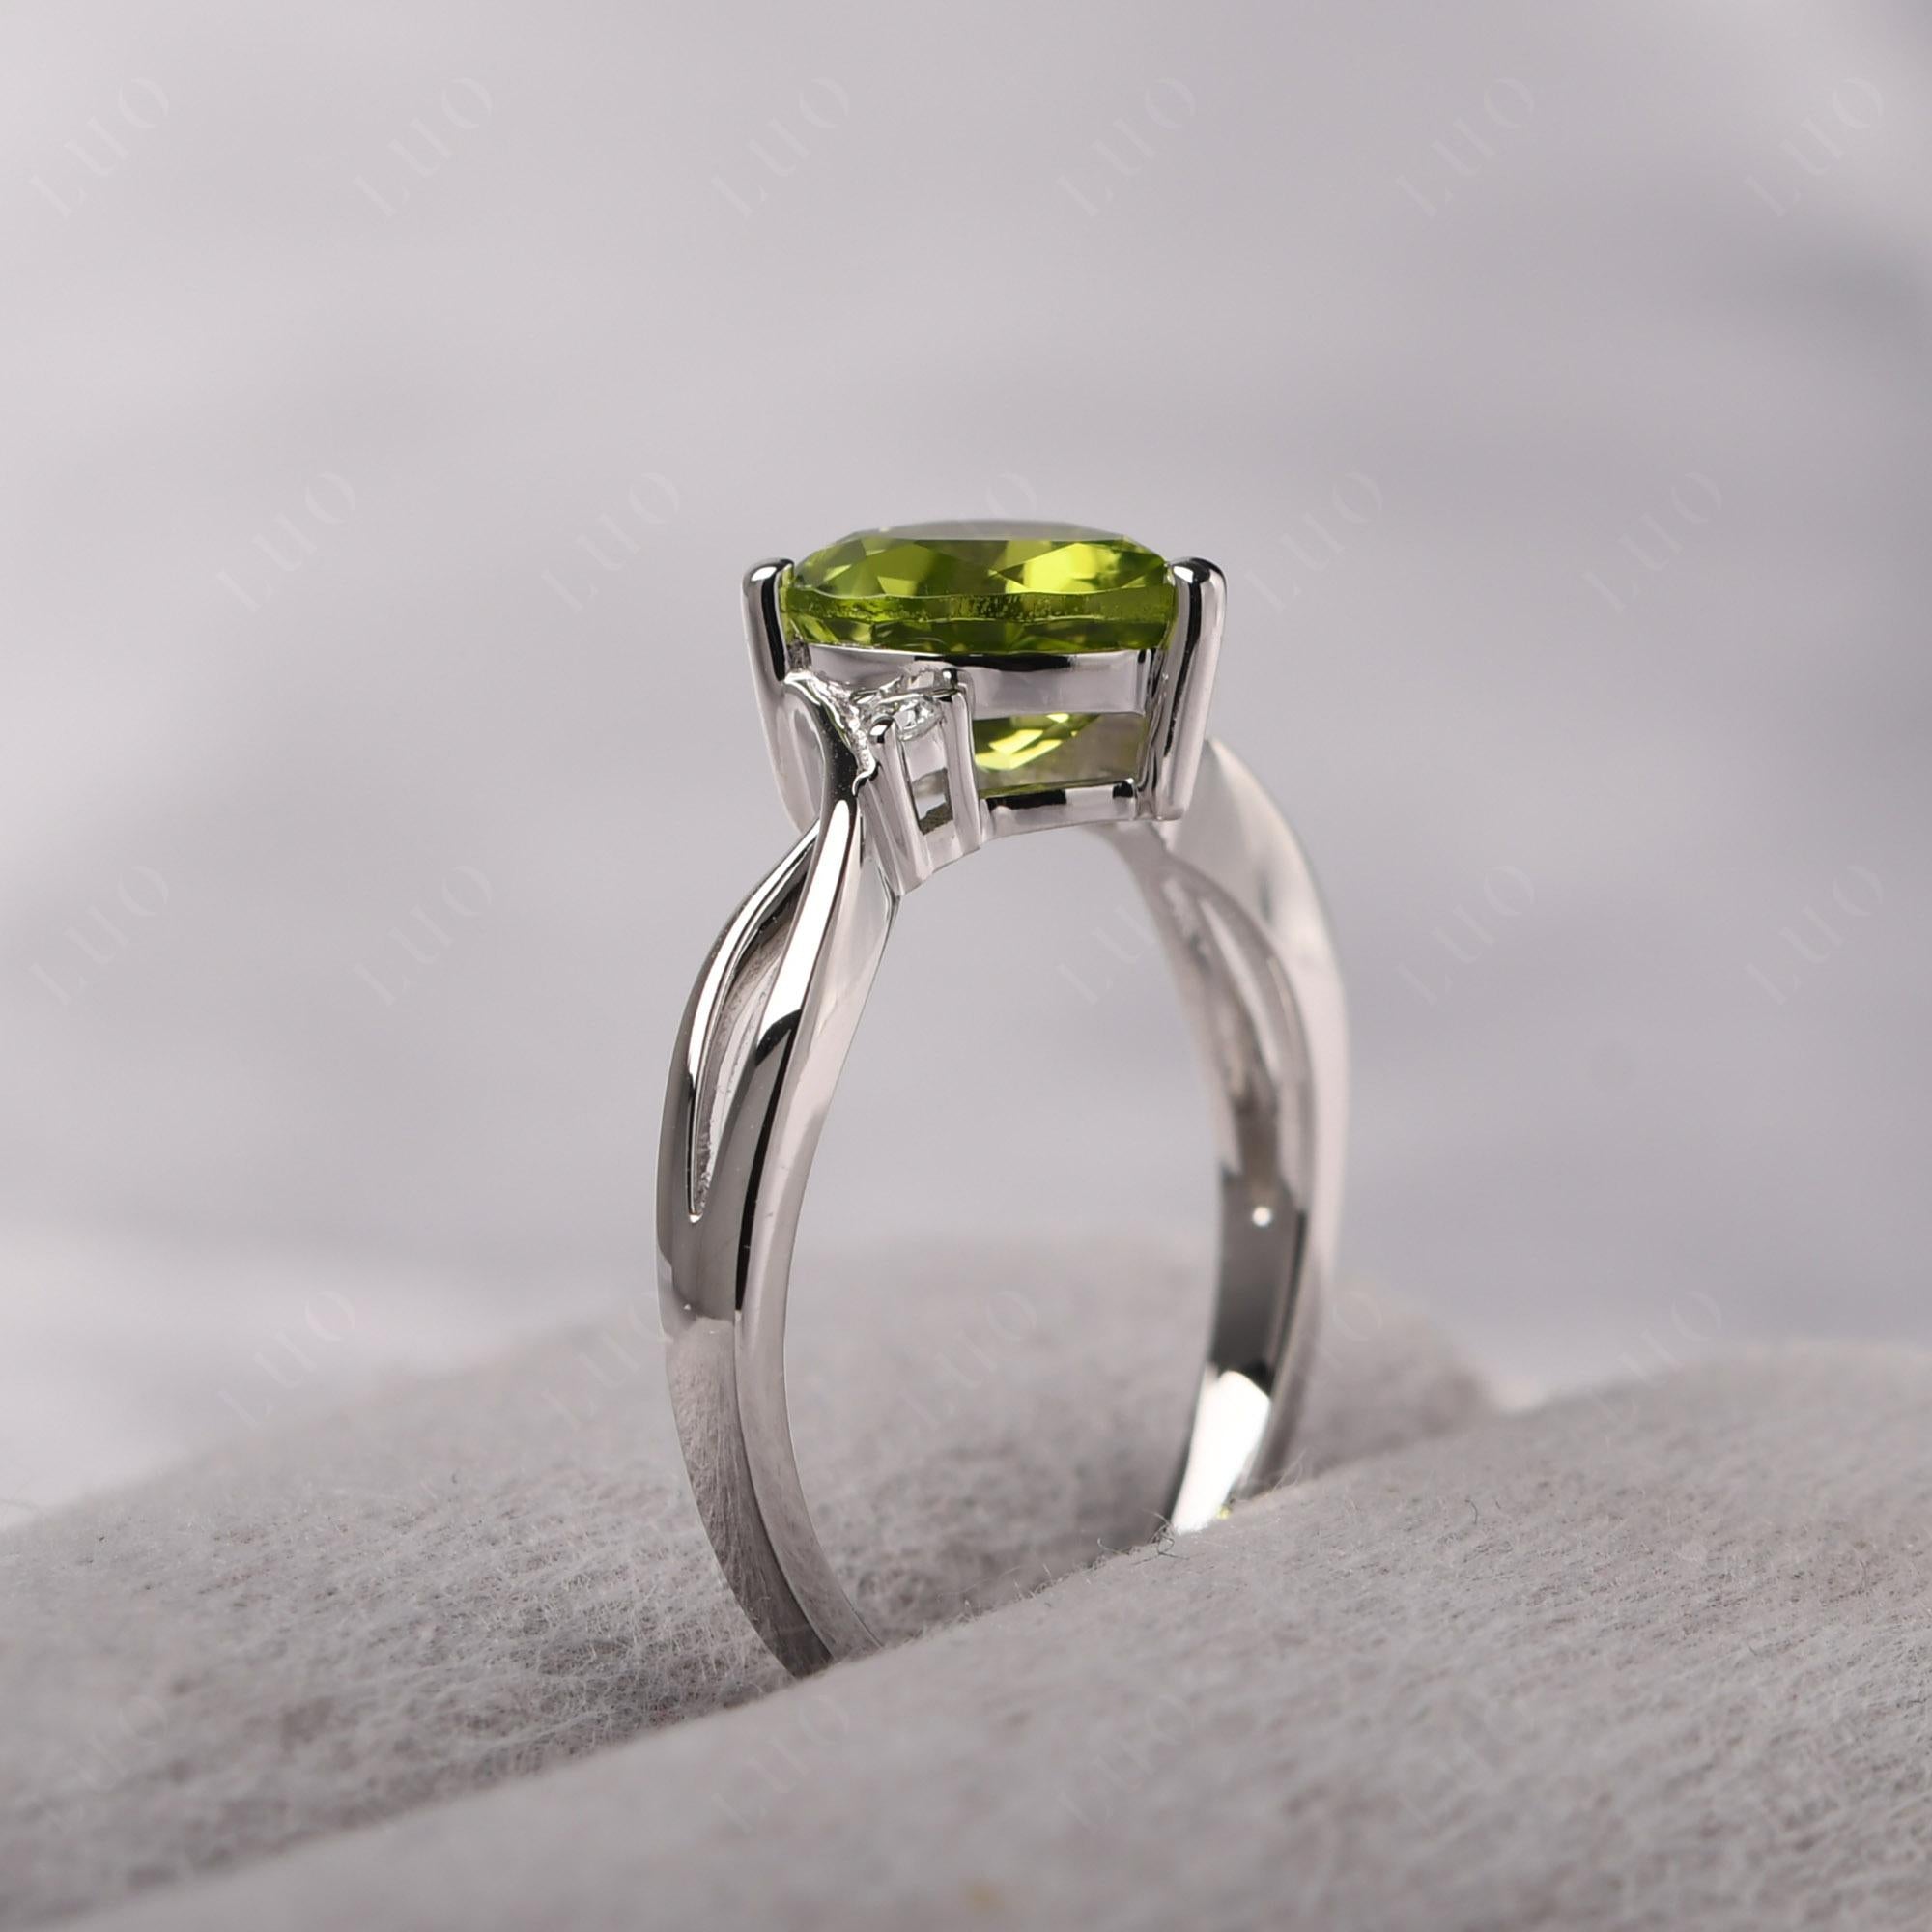 Heart Cut Peridot Engagement Ring - LUO Jewelry